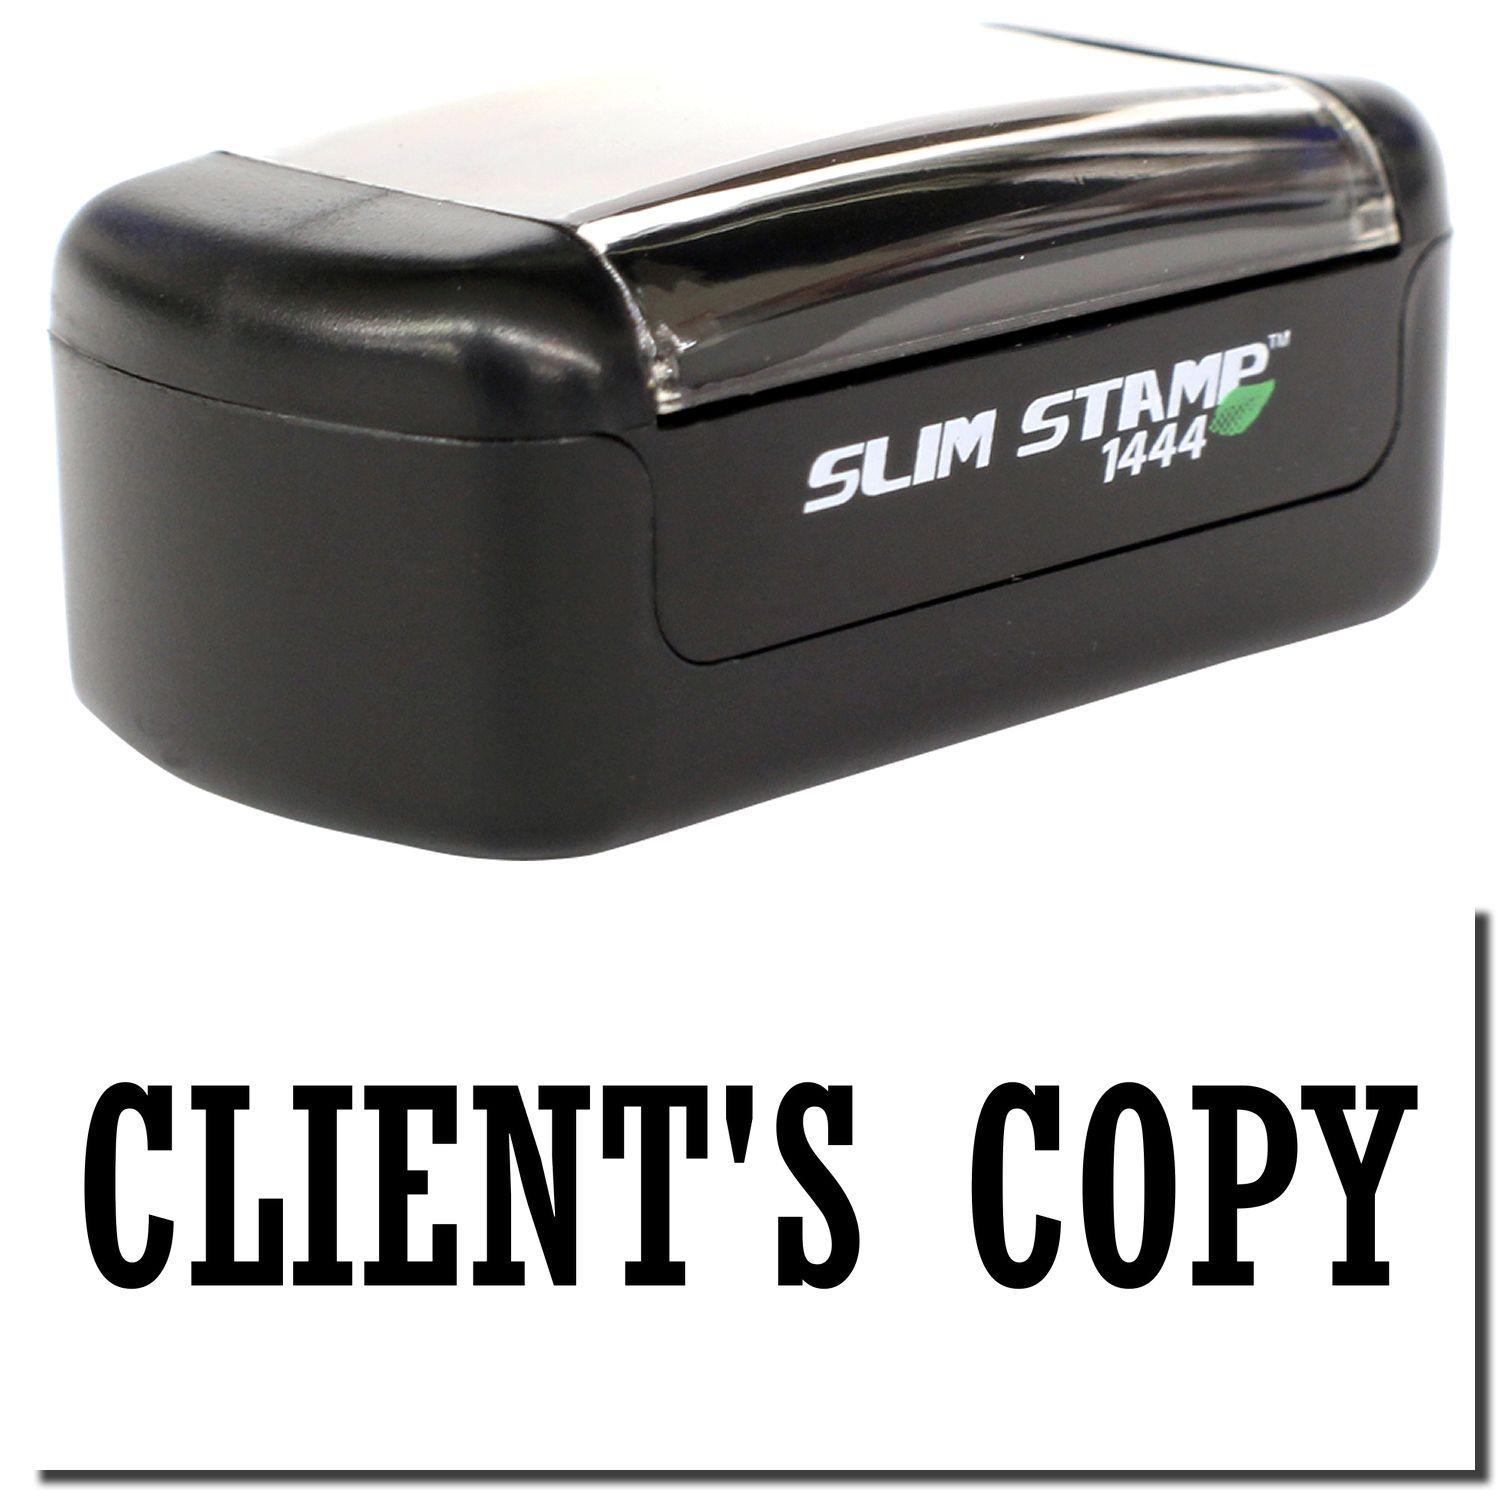 A stock office pre-inked stamp with a stamped image showing how the text "CLIENT'S COPY" is displayed after stamping.